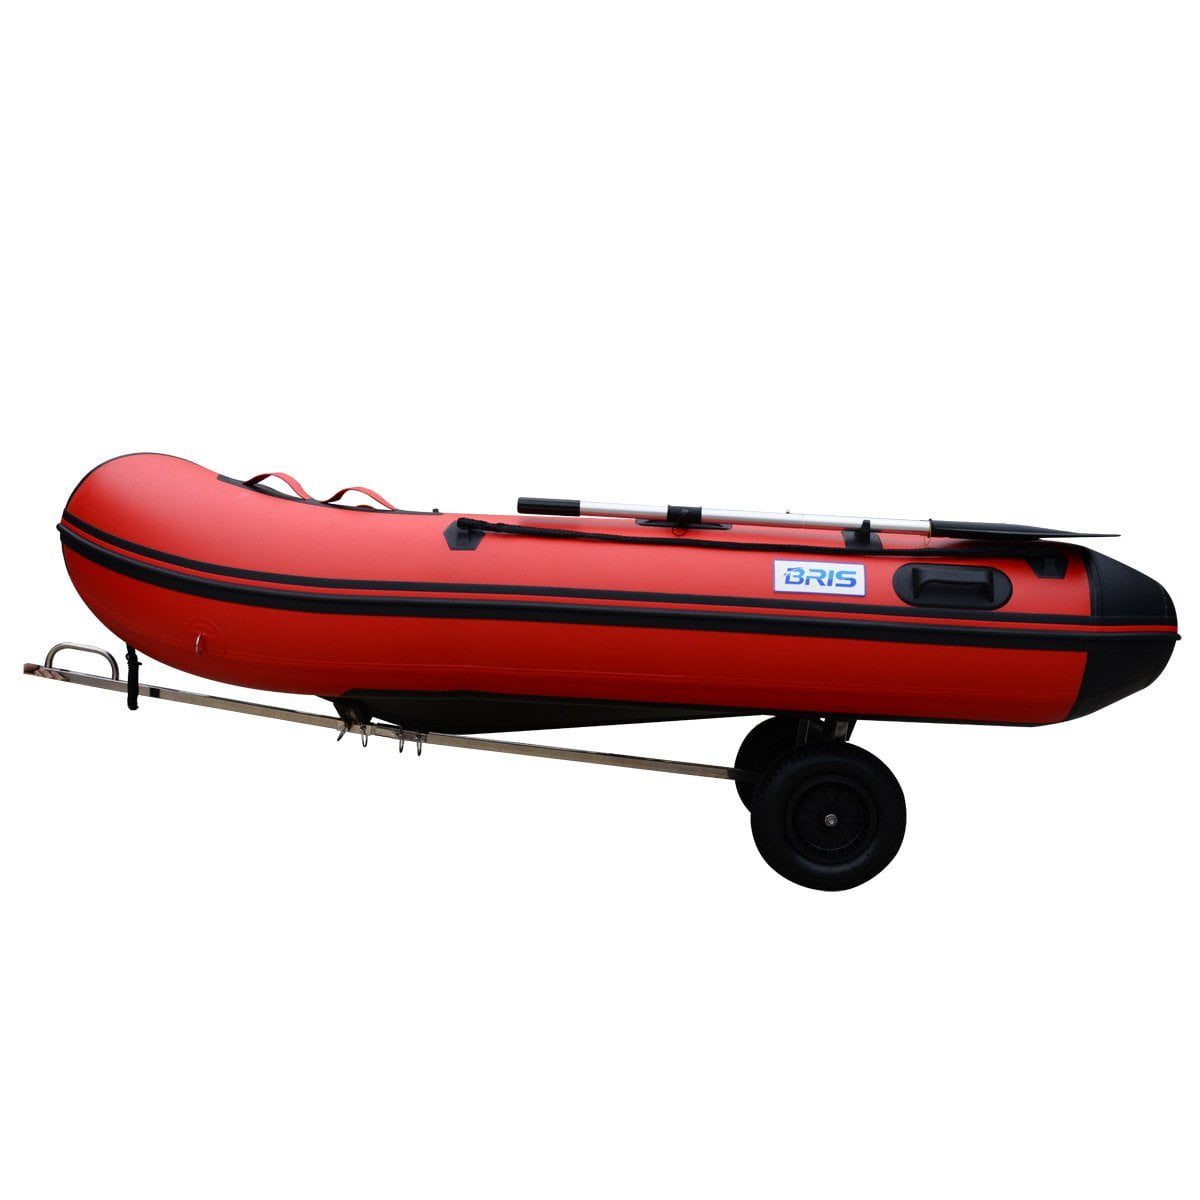 Stainless Steel Boat Launching Trailer Hand Dolly for Inflatable with 16” Wheels 